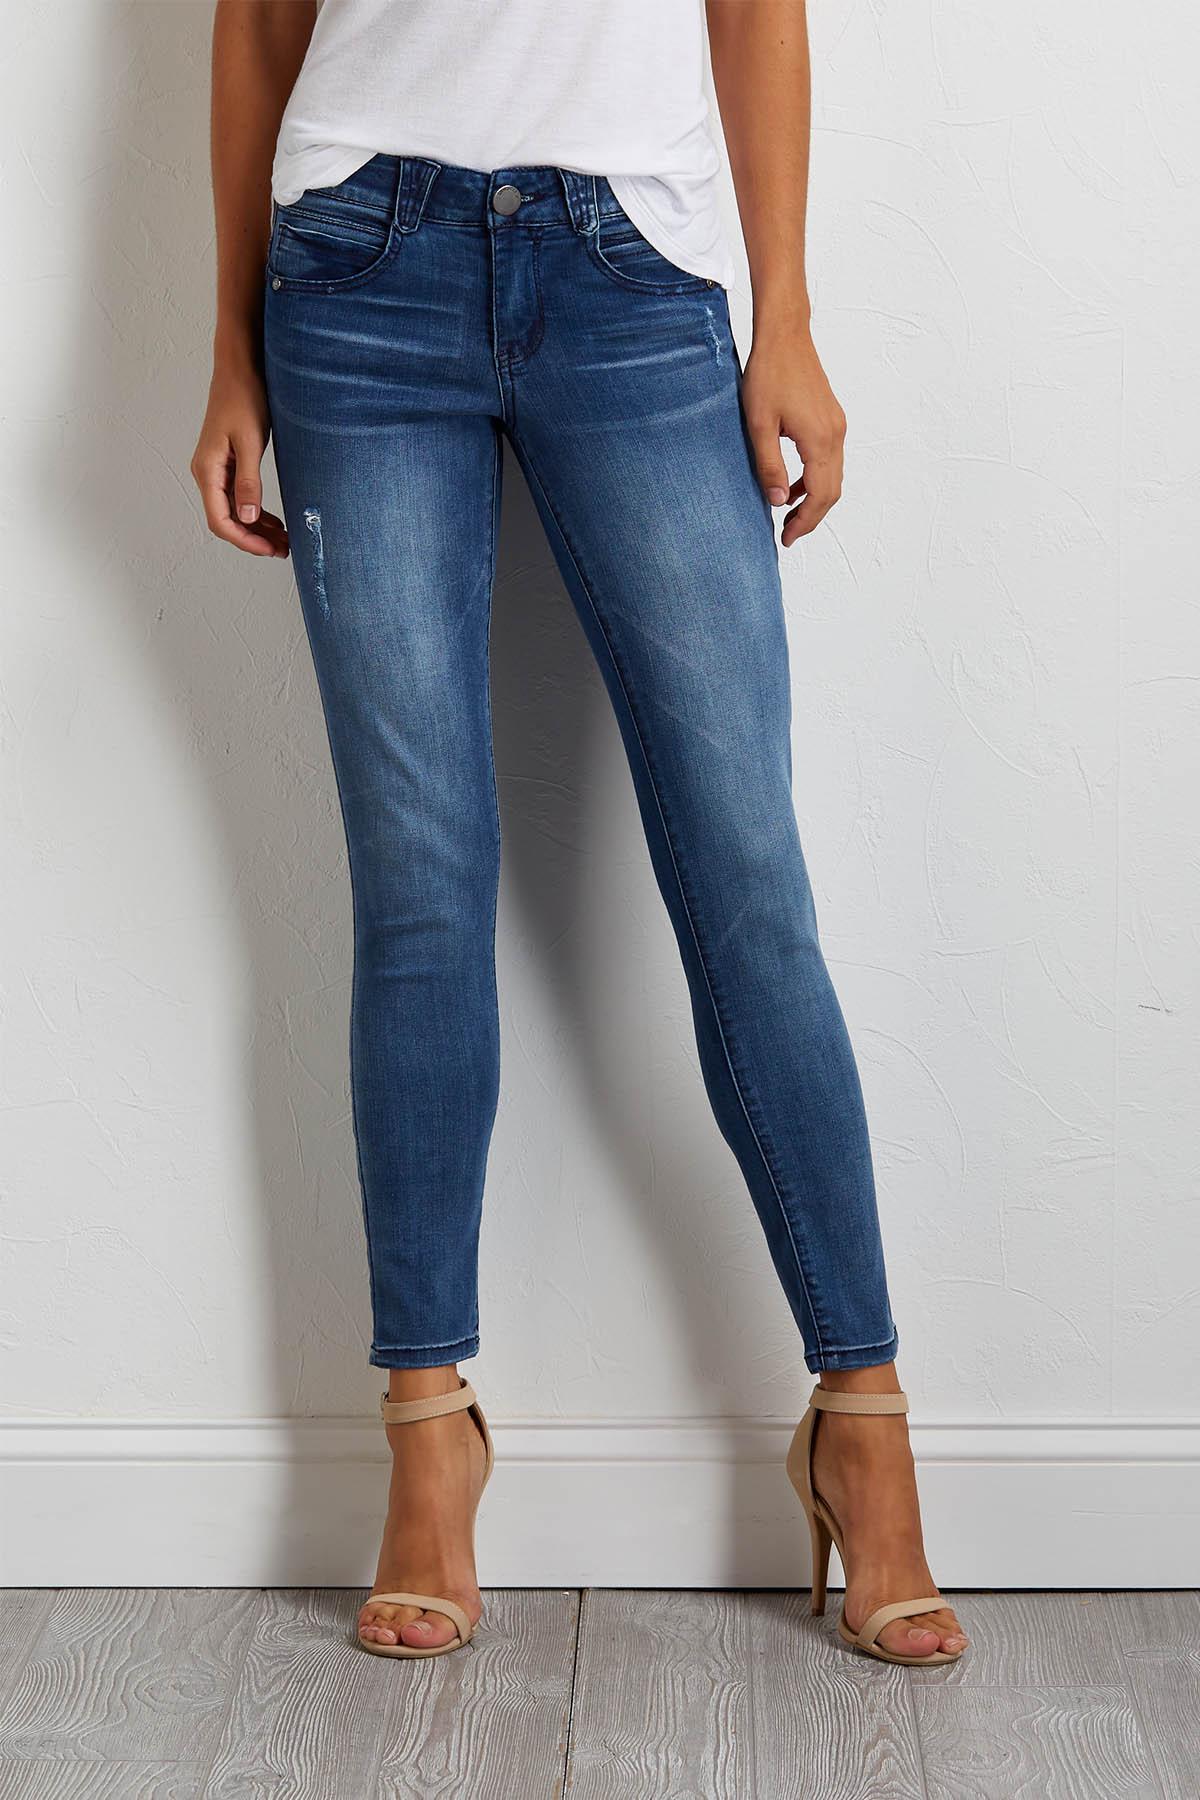 best jeans for 40 year old woman